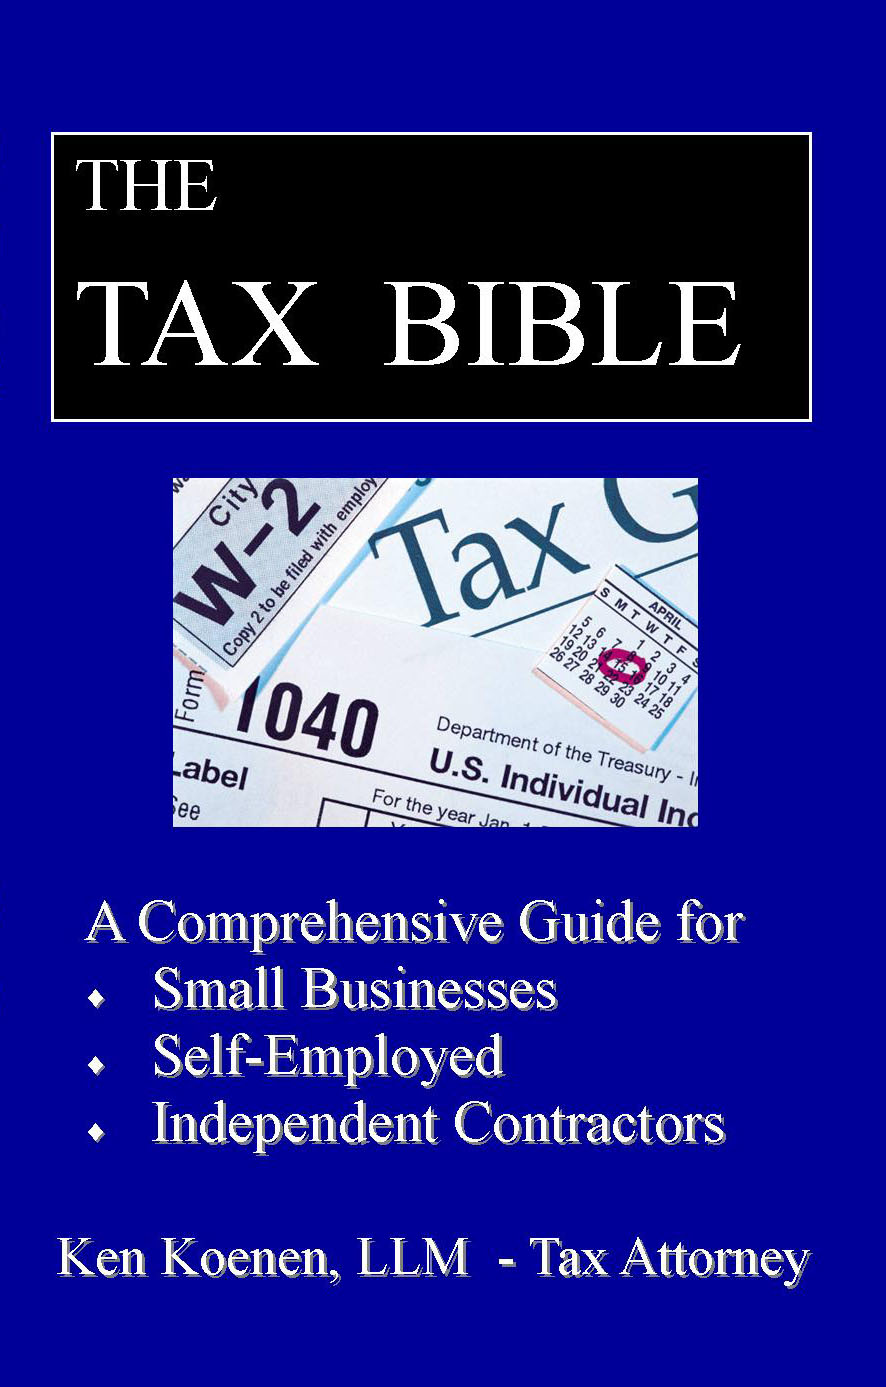 The Tax Bible